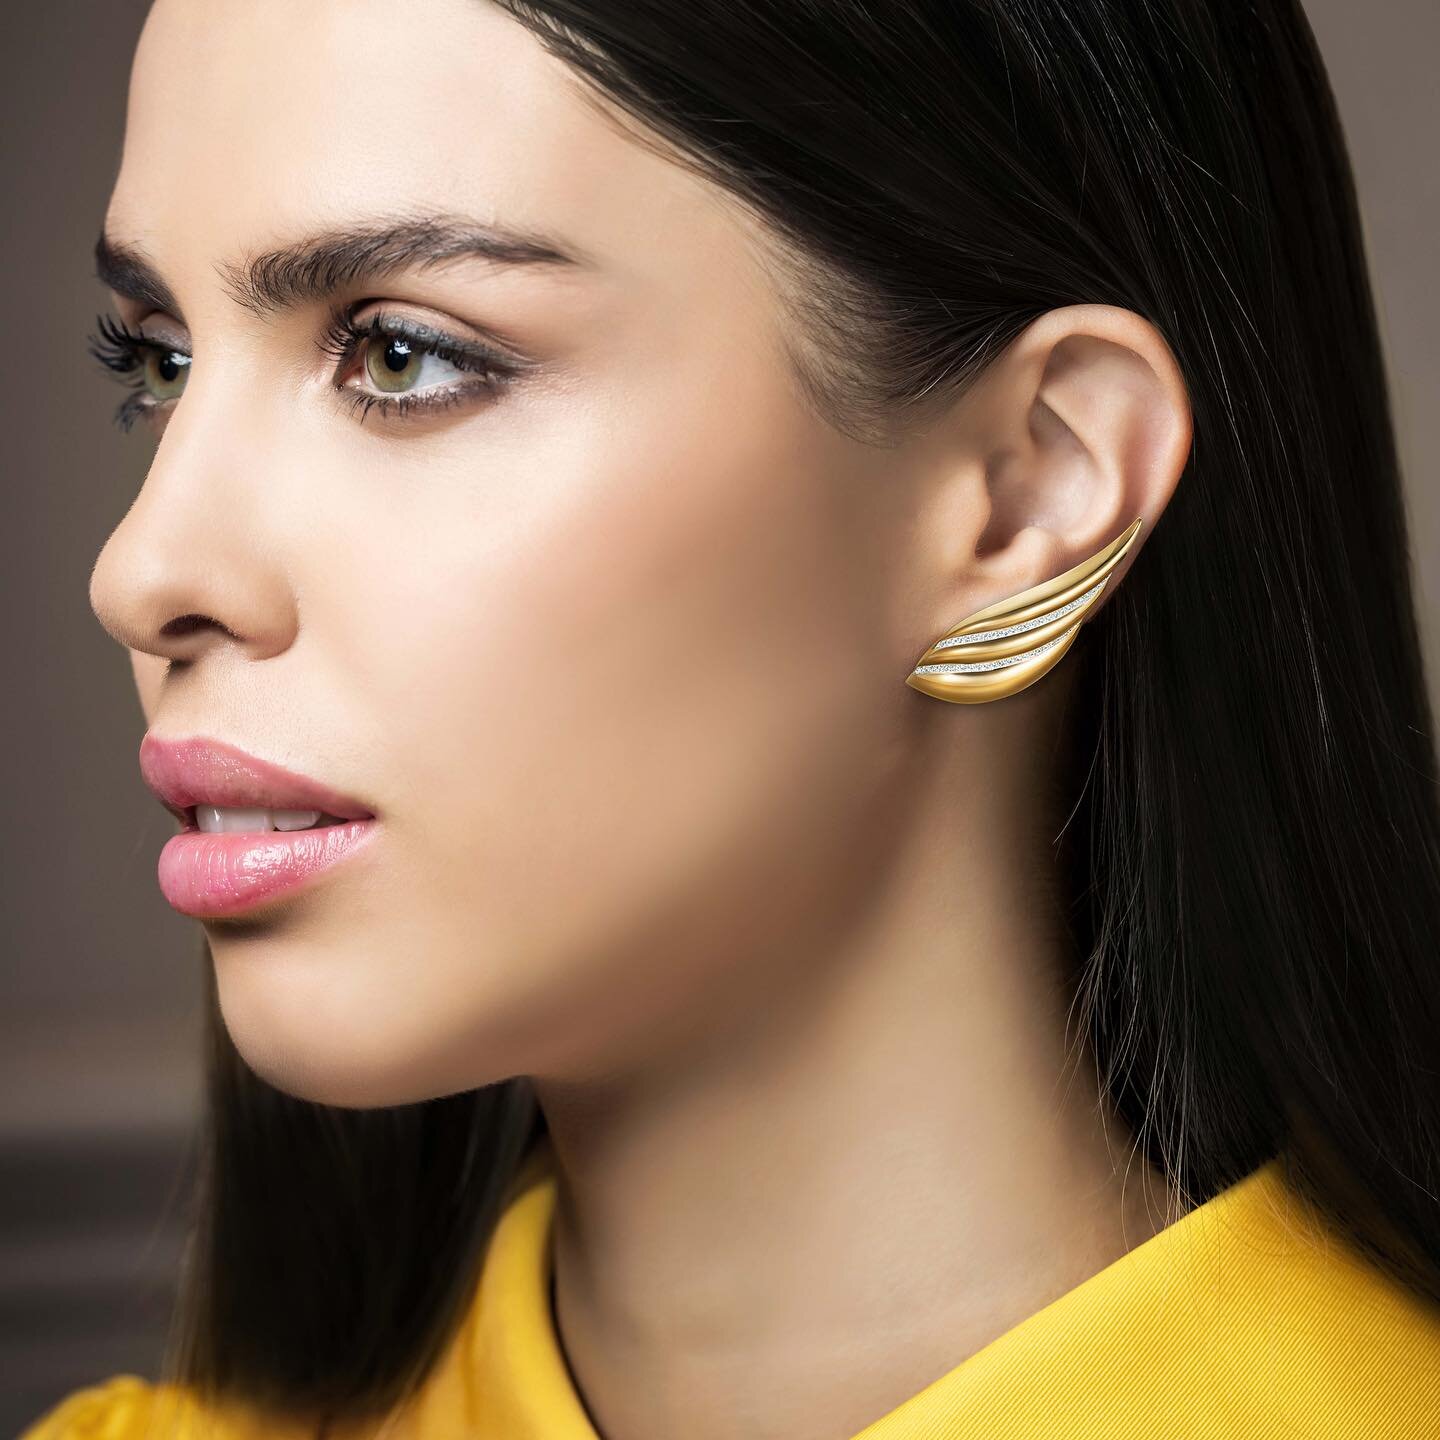 BLAZING TRAILS - The Hawk Earrings, with its golden feathers majestically arching up the ear 🤎

A gold-rich collection featuring undulating lines accentuated with fine trails of natural white diamonds.

*The Falcon, a global symbol of power, strengt